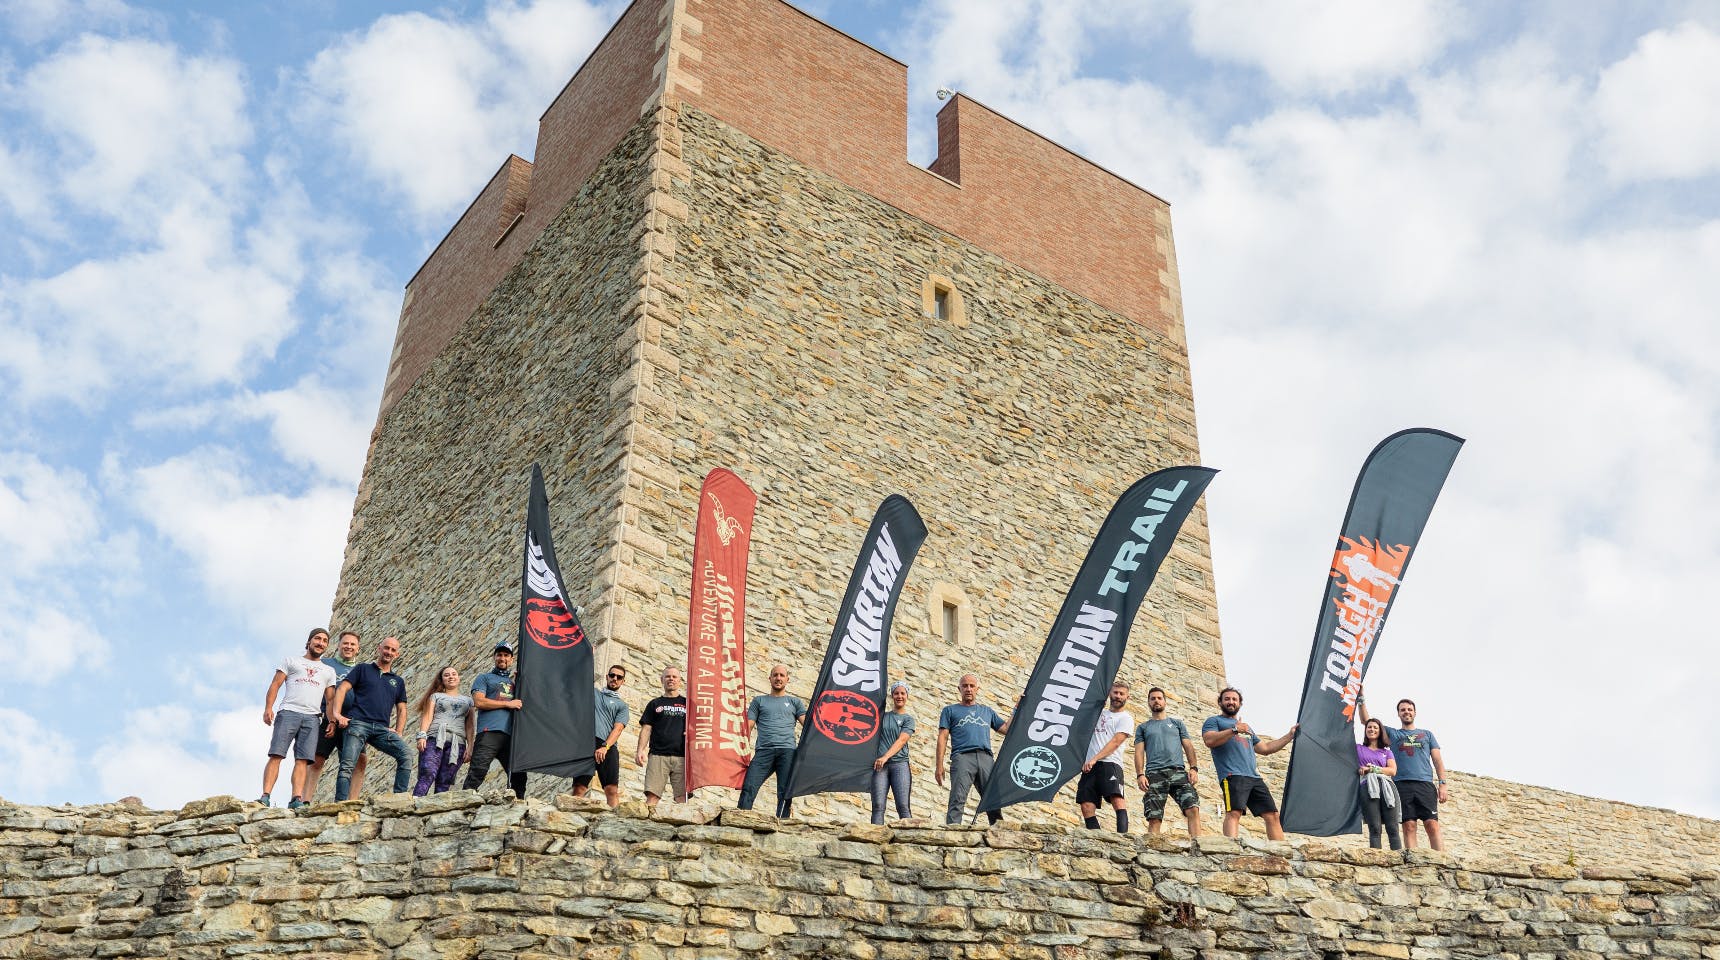 Spartan, the World's Largest Obstacle Race and Endurance Brand, to